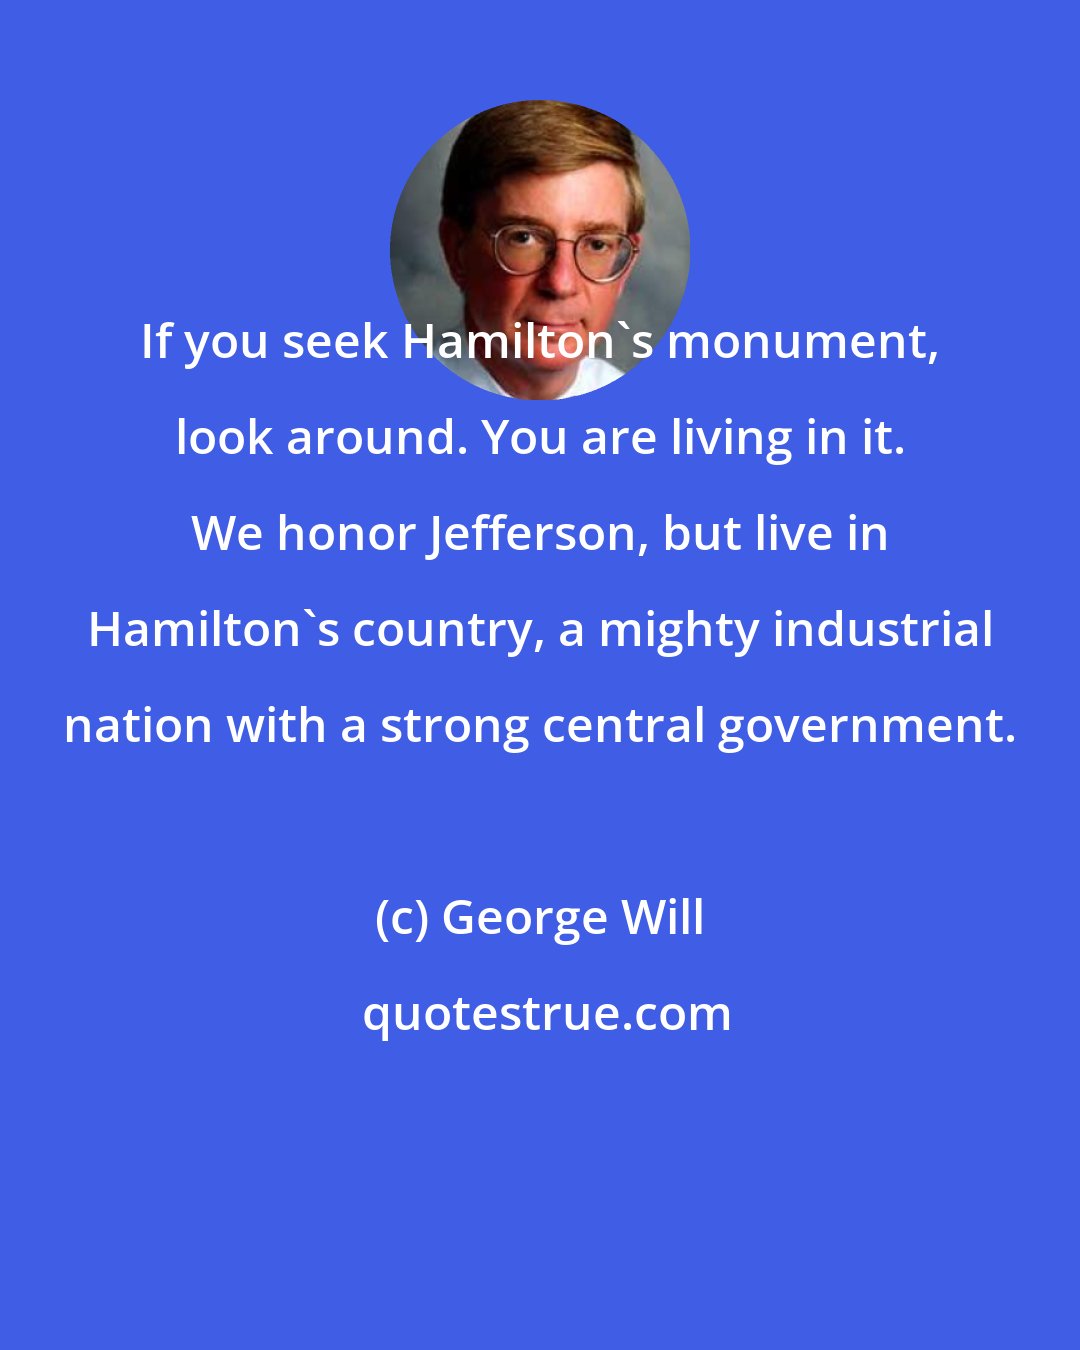 George Will: If you seek Hamilton's monument, look around. You are living in it. We honor Jefferson, but live in Hamilton's country, a mighty industrial nation with a strong central government.